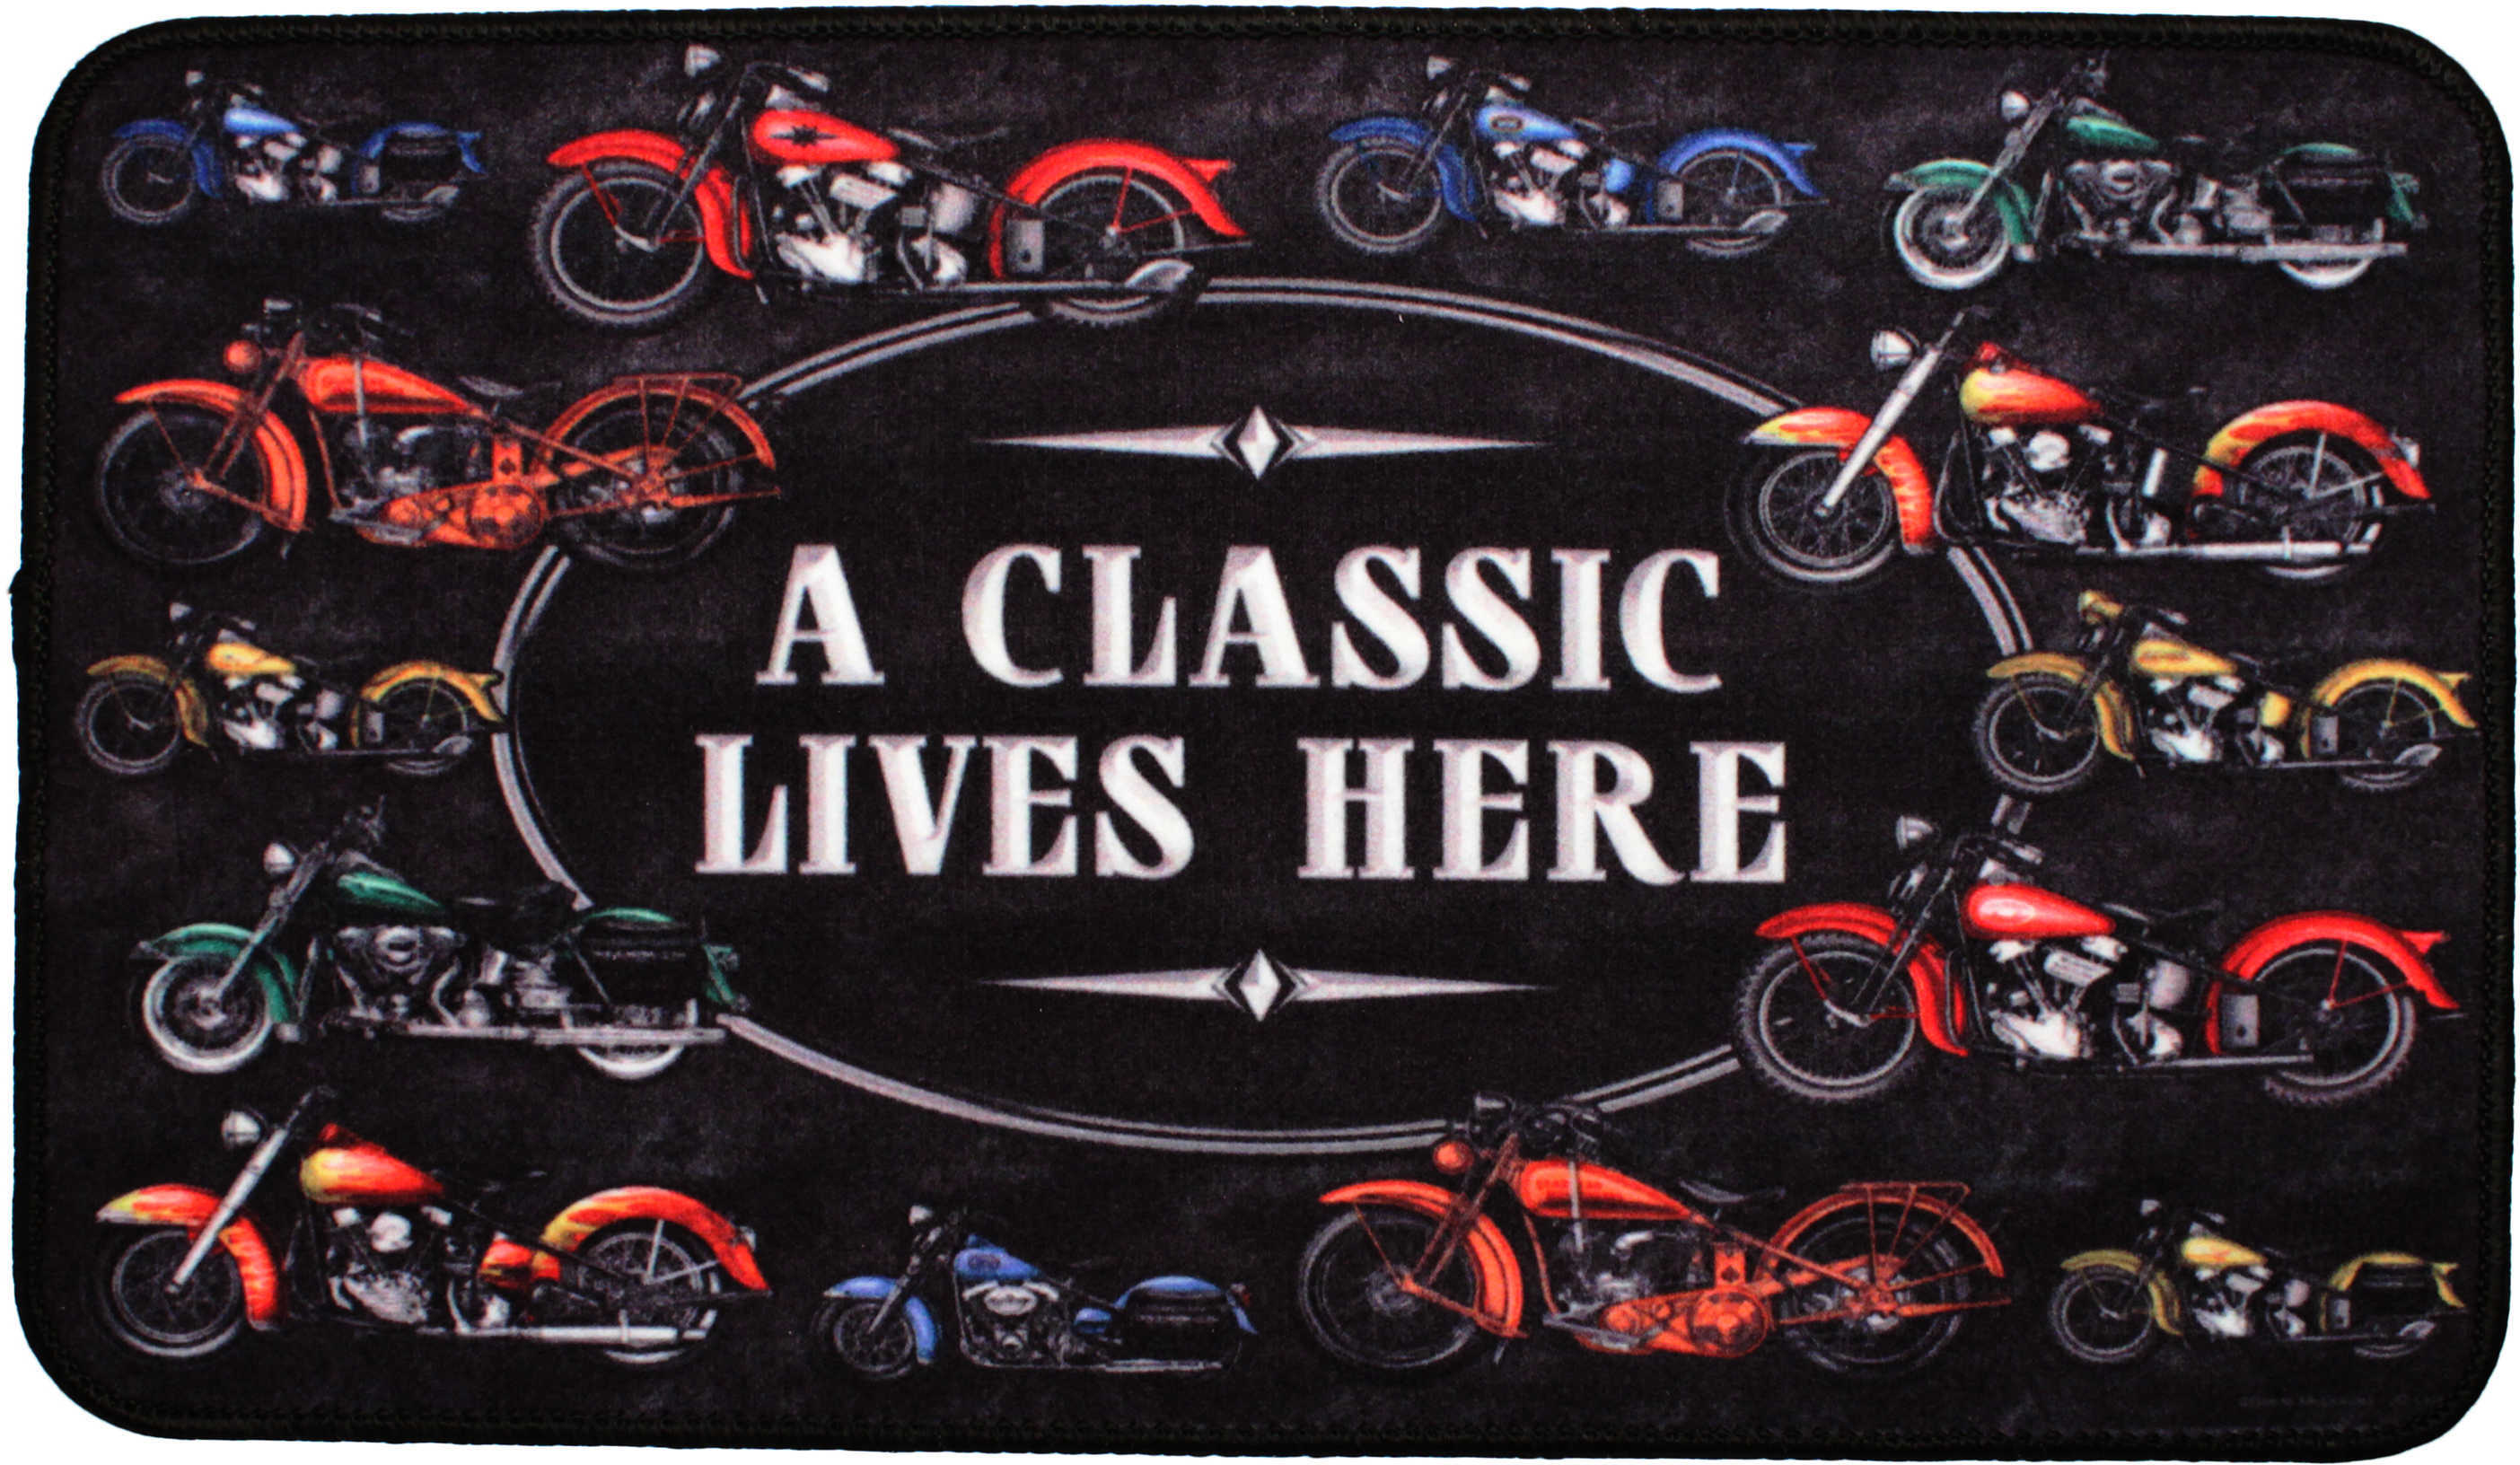 Rivers Edge Products Door Mat, 30"x18" A Classic Motorcycle 1876